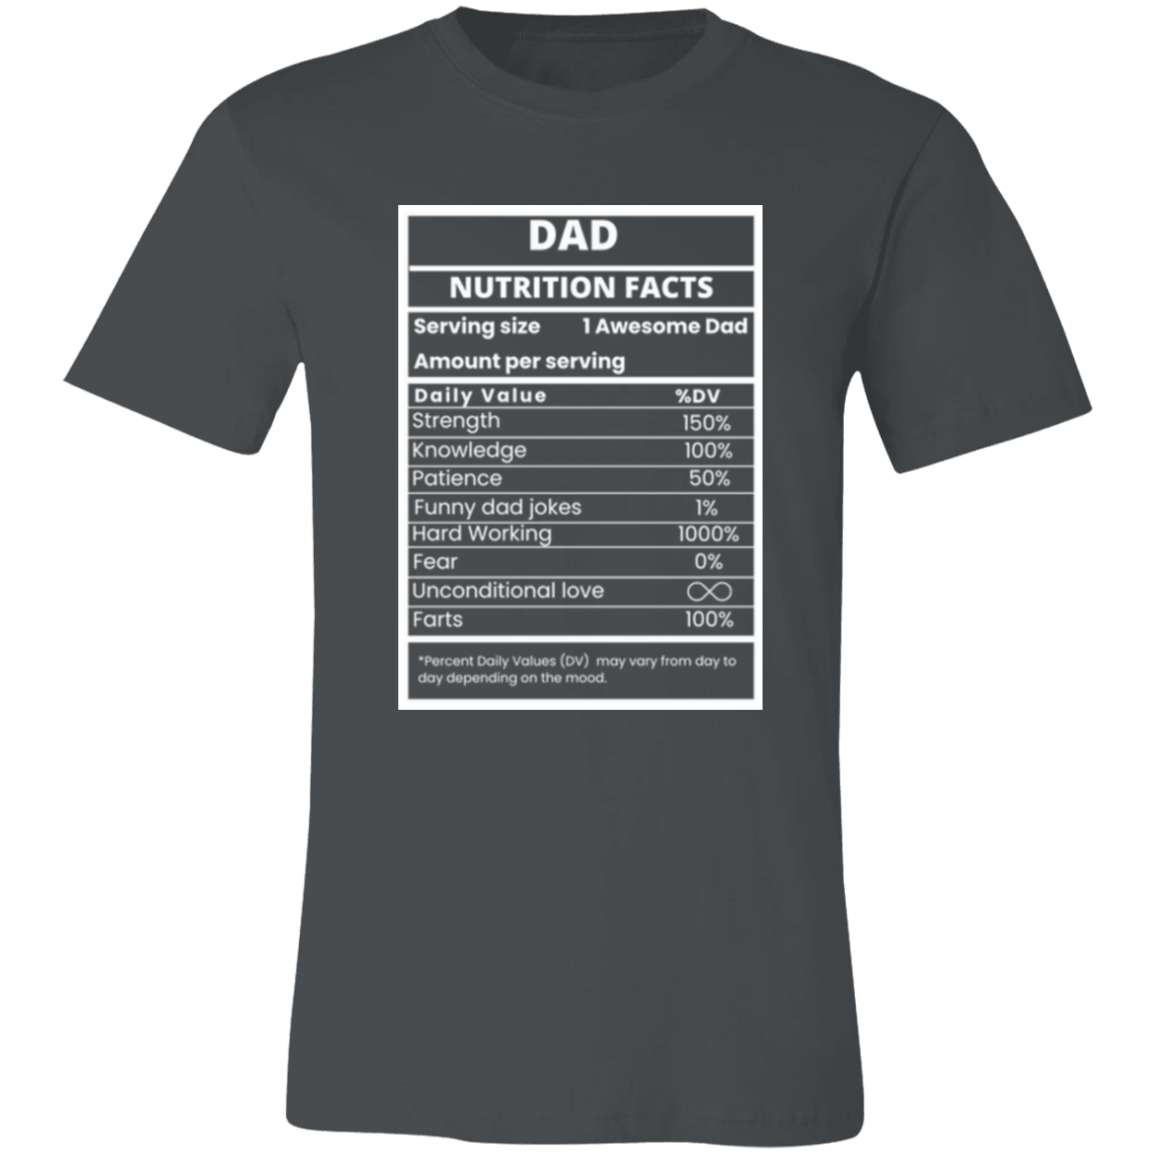 Dad Nutrition Facts Shirt | Funny Father's Day Shirt, Dad Jokes Gift, Unique Father's T-Shirt